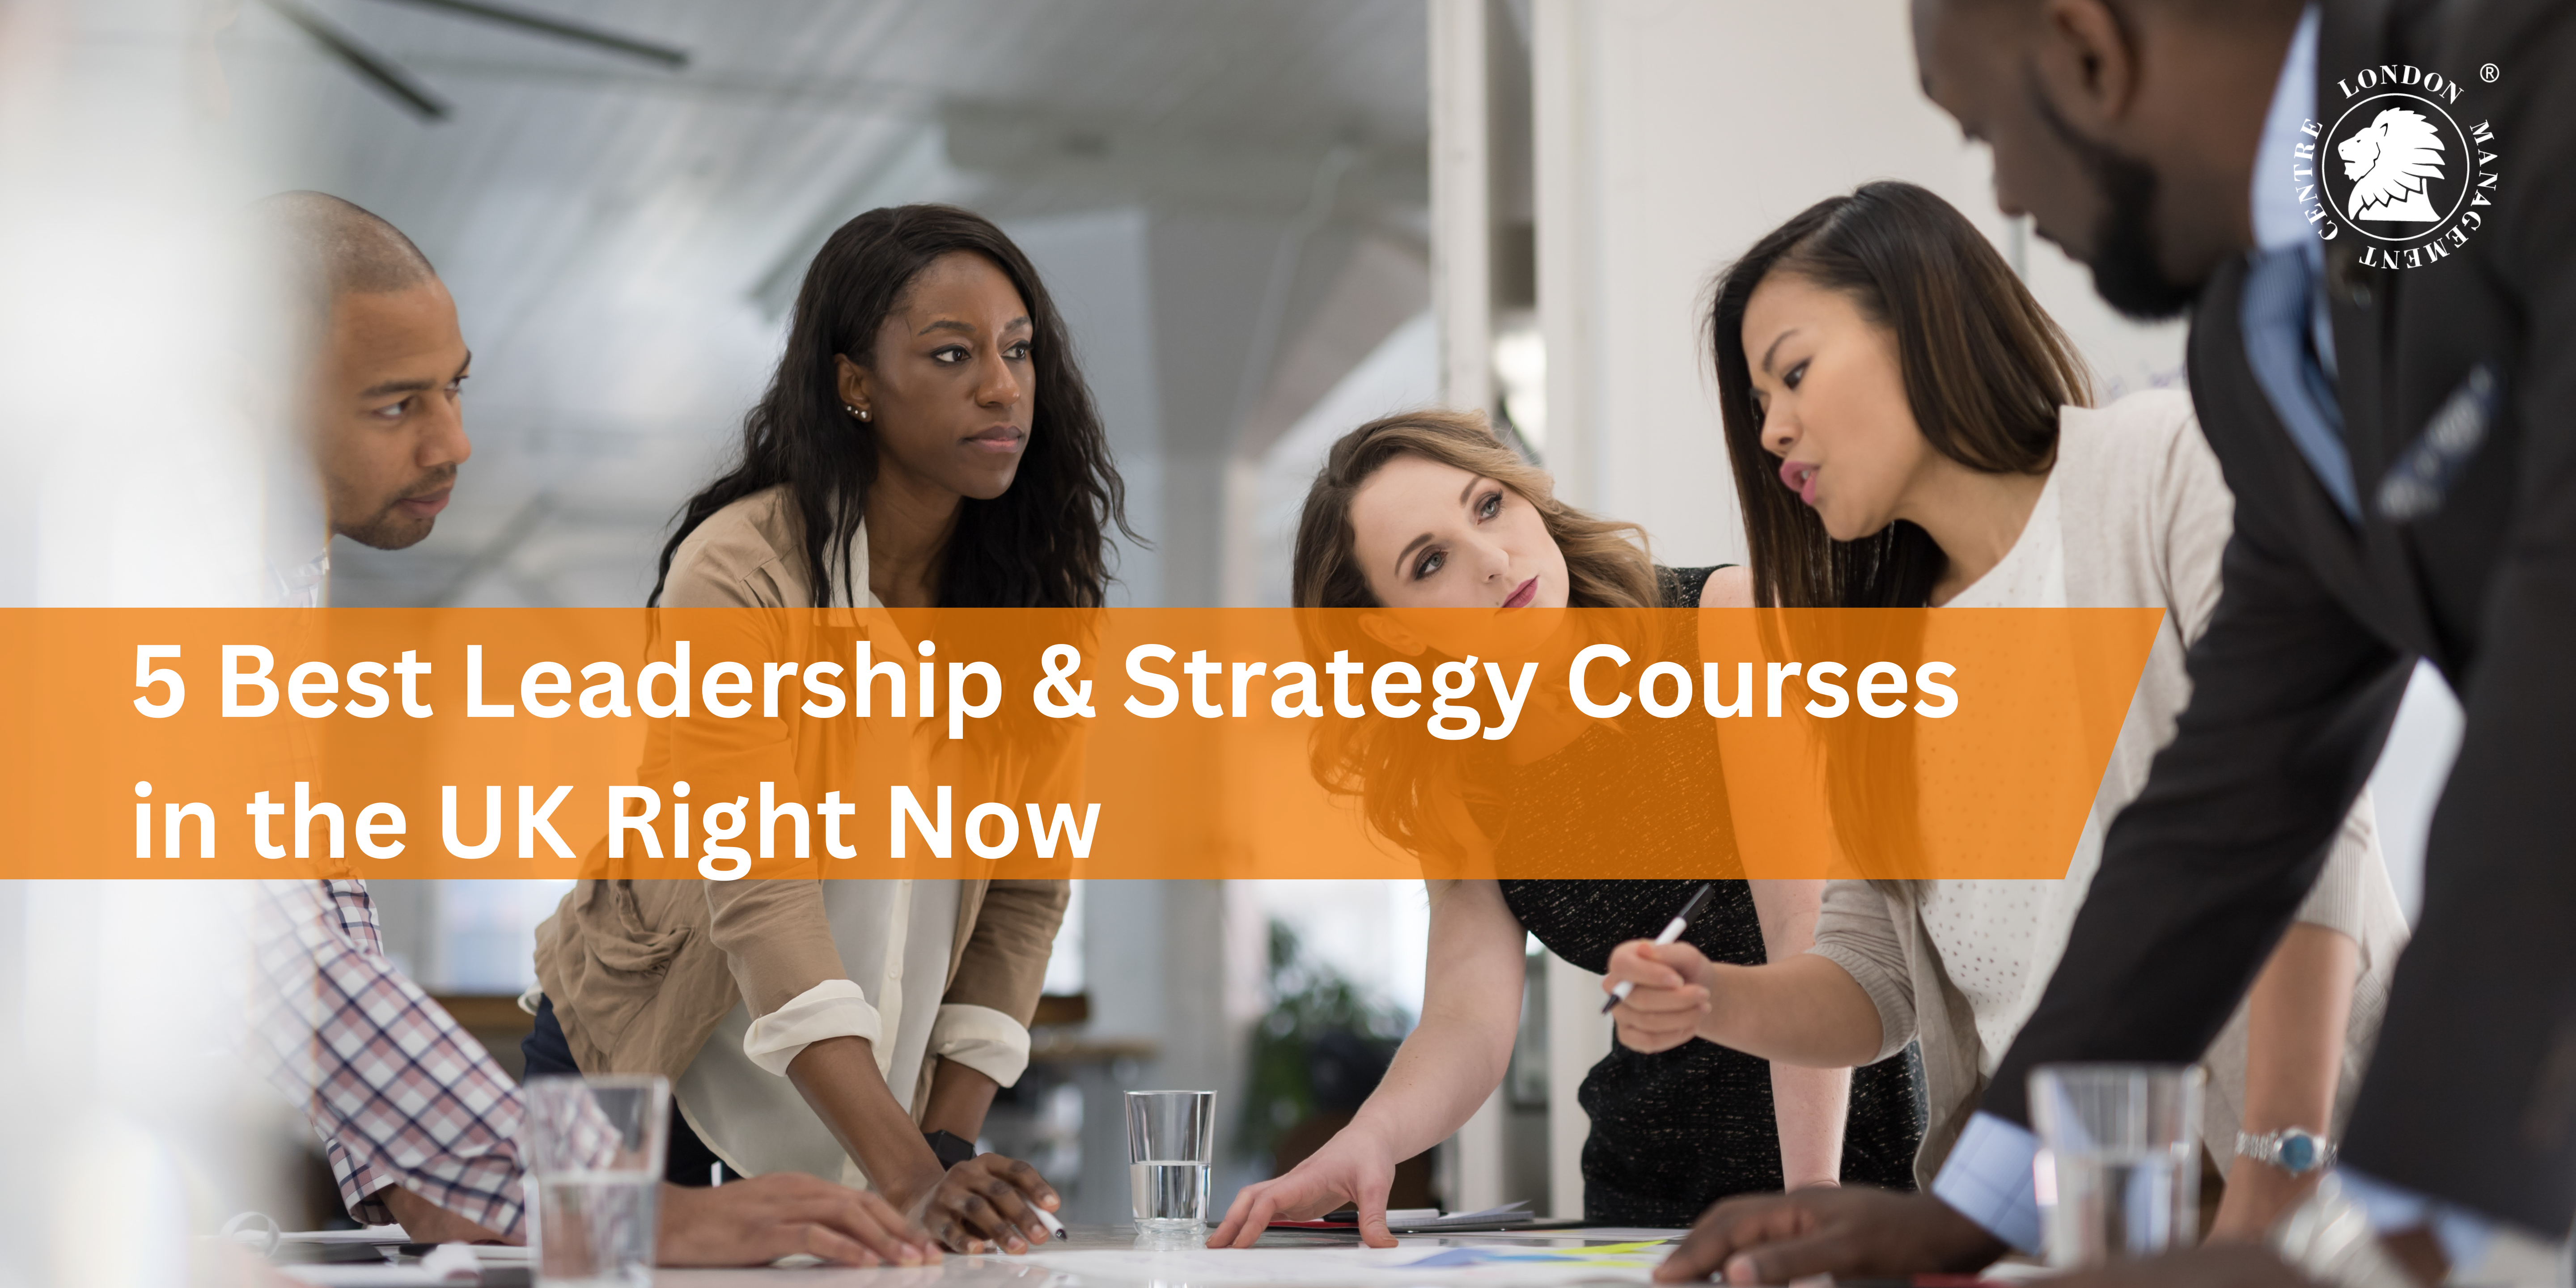 5 Best Leadership & Strategy Courses in the UK Right Now